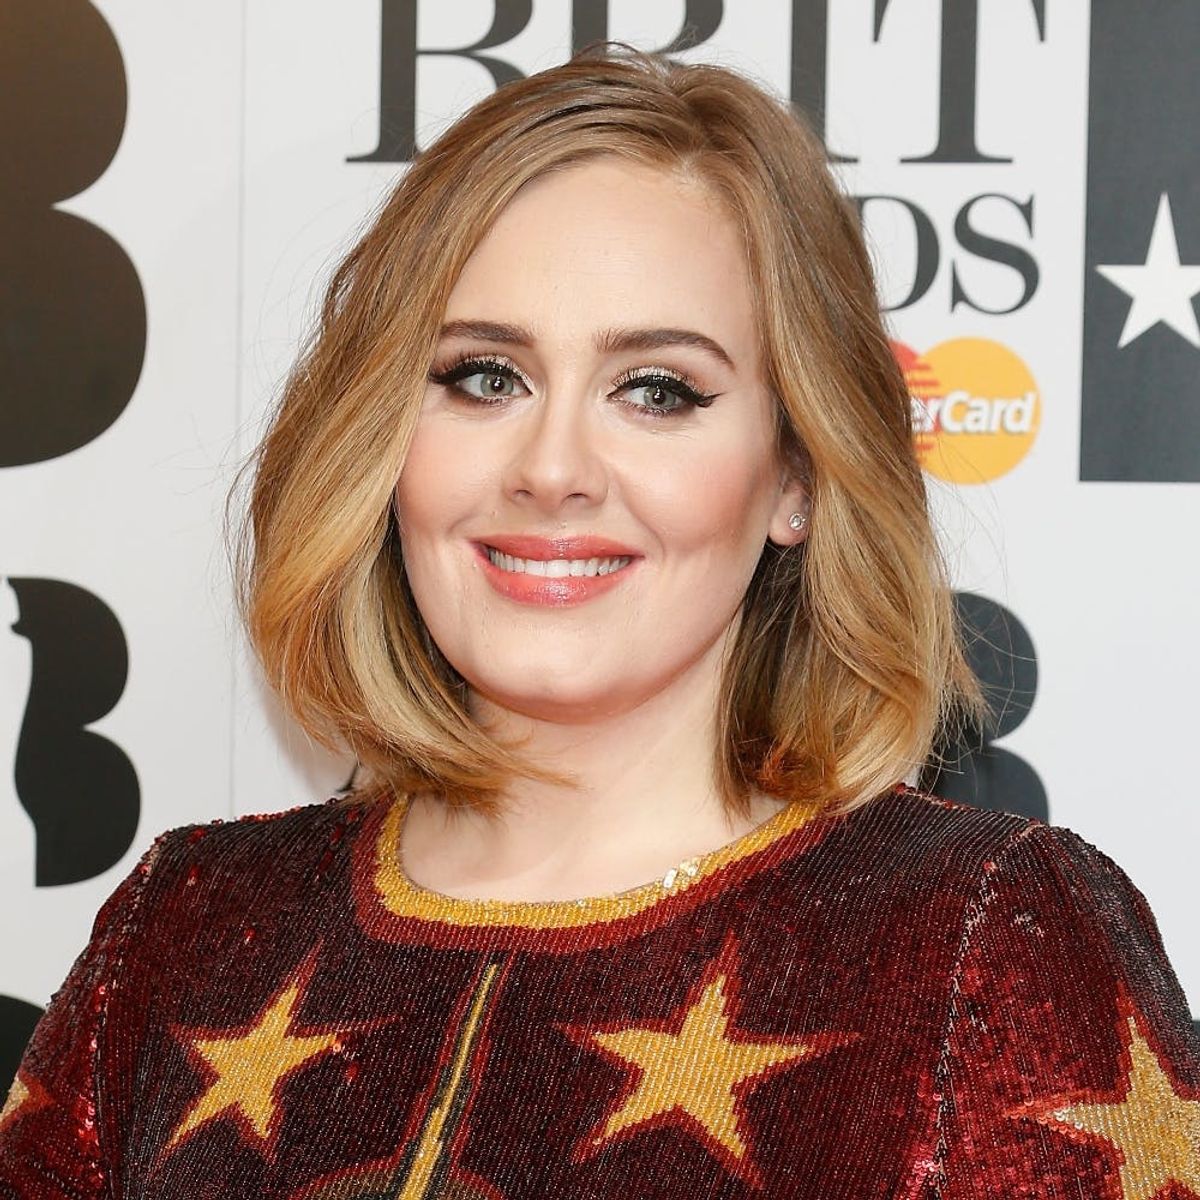 Adele Dedicated Her Entire NYC Concert to Brad and Angelina